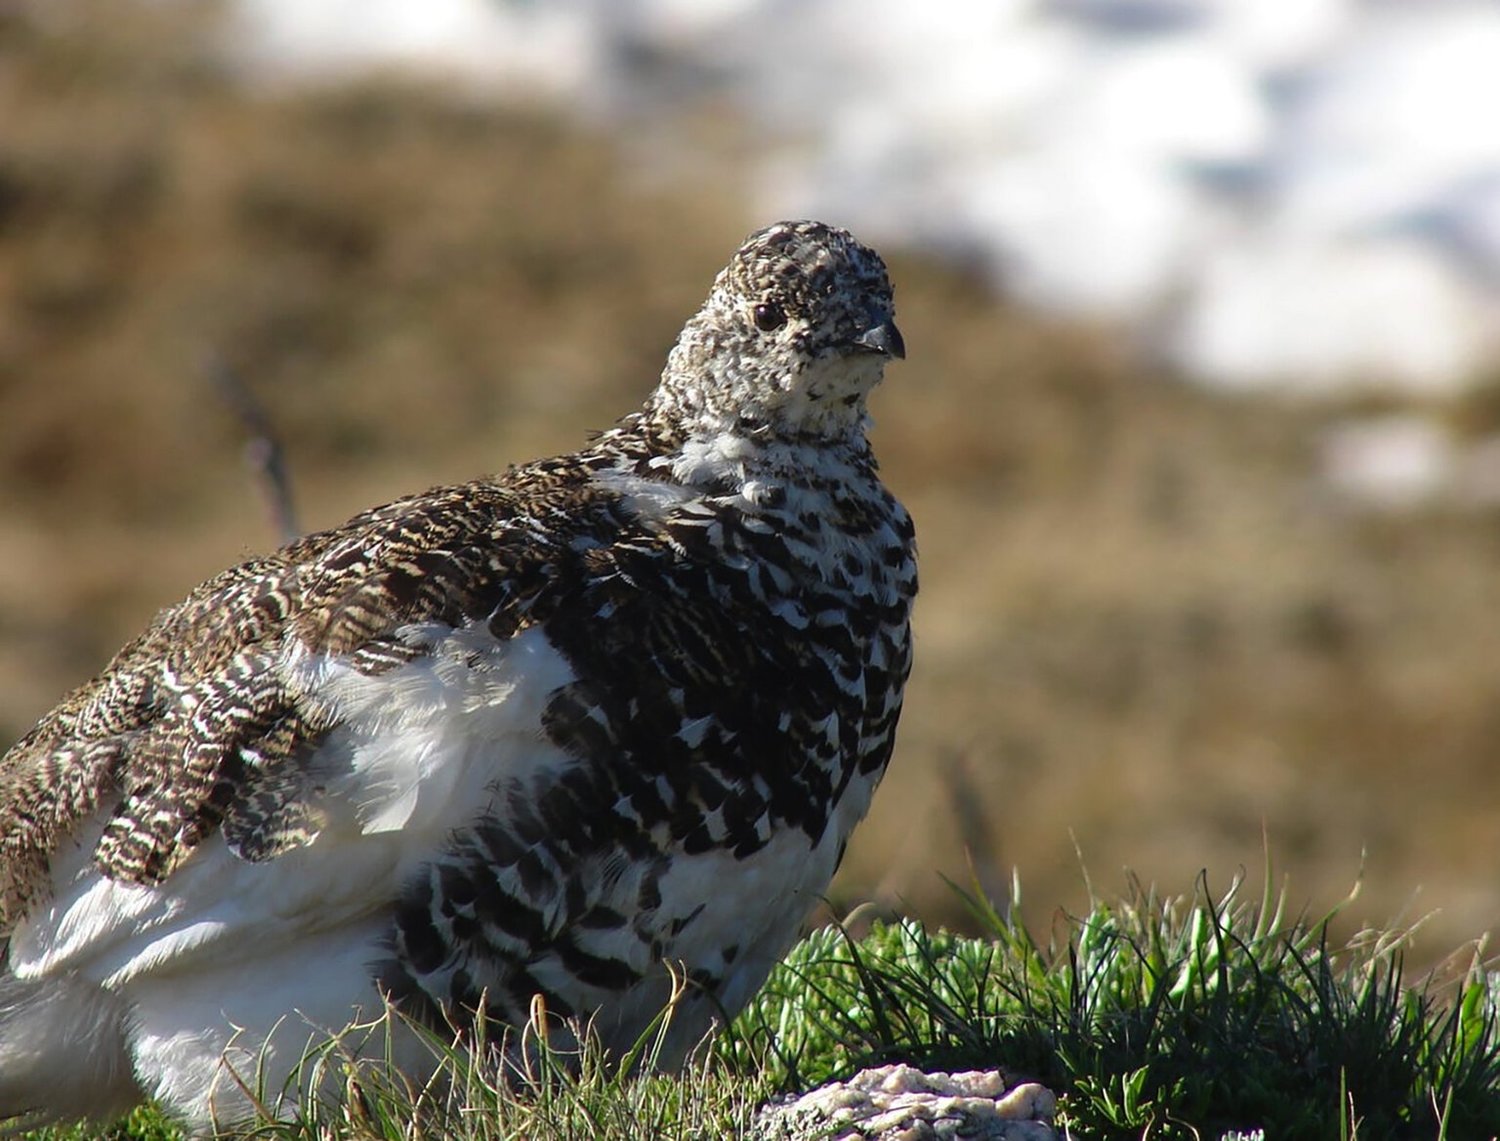 The Mount Rainier white-tailed ptarmigan is found in the Cascade Mountains and spends its entire life on mountaintops. The birds move seasonally between snow-covered habitat and summer alpine meadows. (Peter Plage / U.S. Fish & Wildlife Service, file)